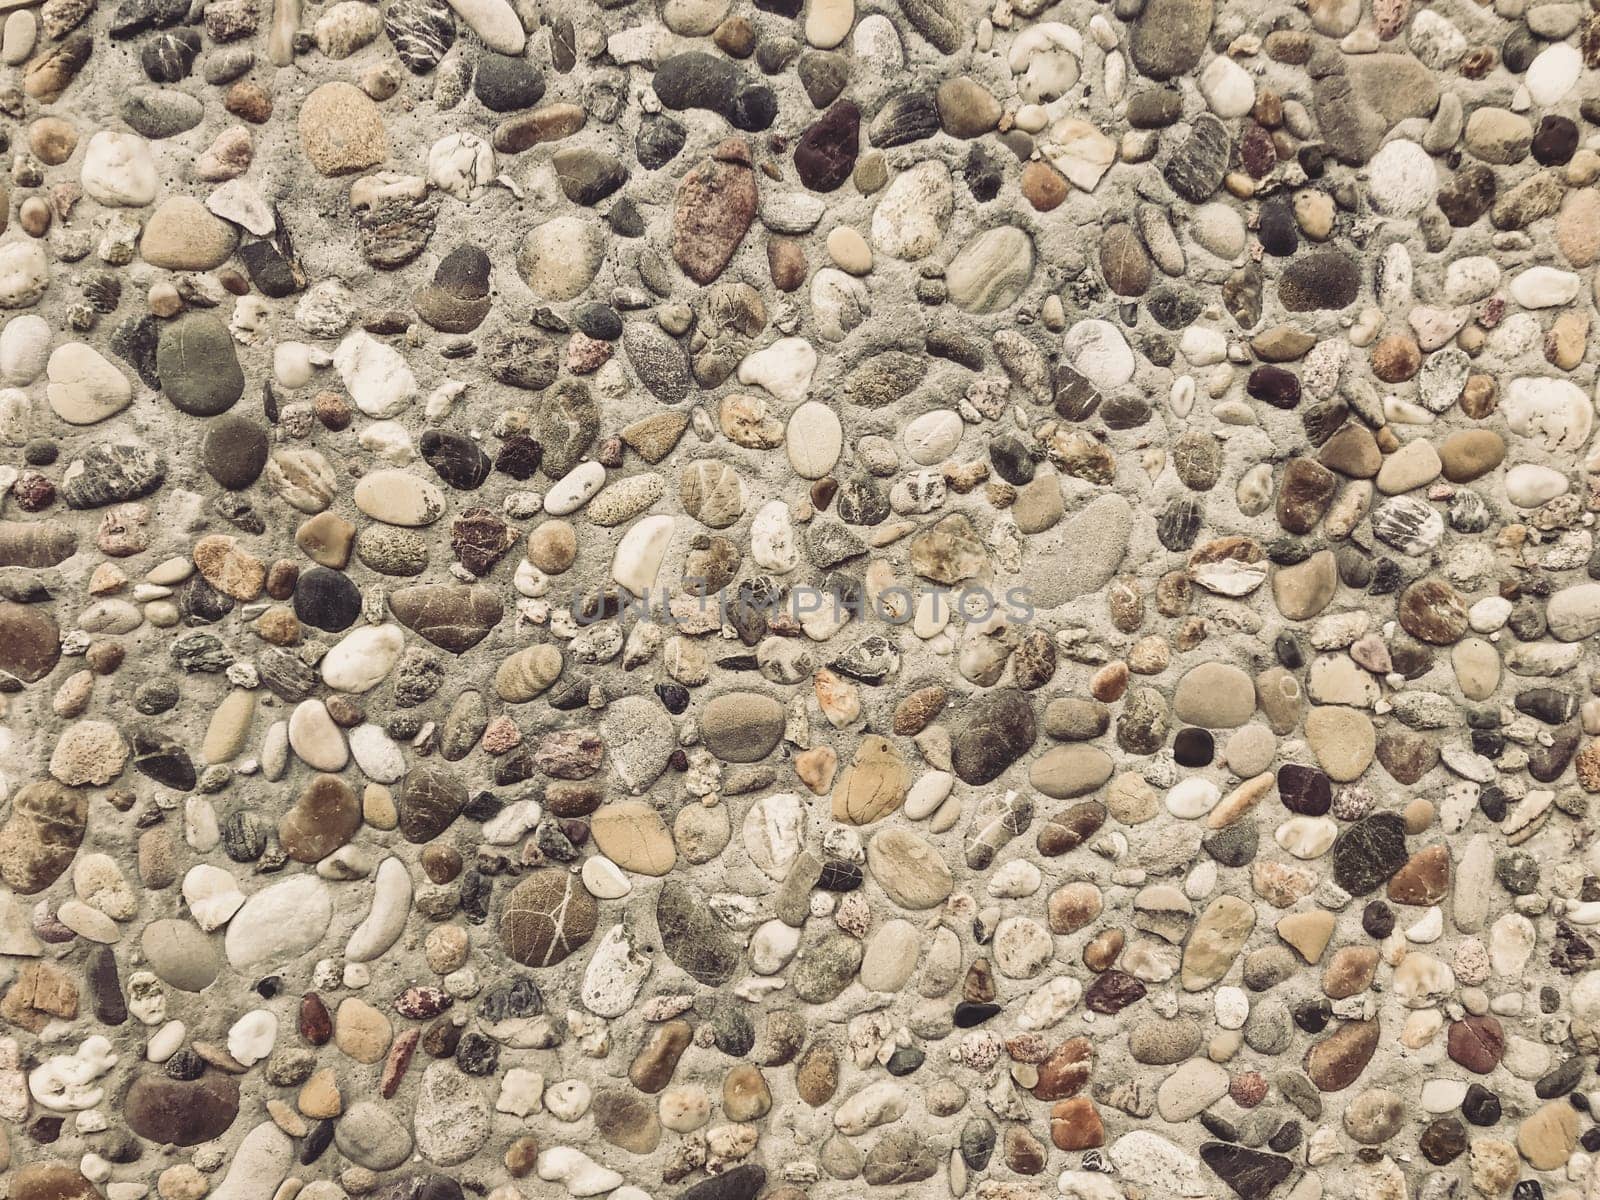 A rocky surface with a variety of sizes and shapes of rocks. The rocks are scattered all over the surface, creating a rough and uneven texture. Concept of ruggedness and natural beauty